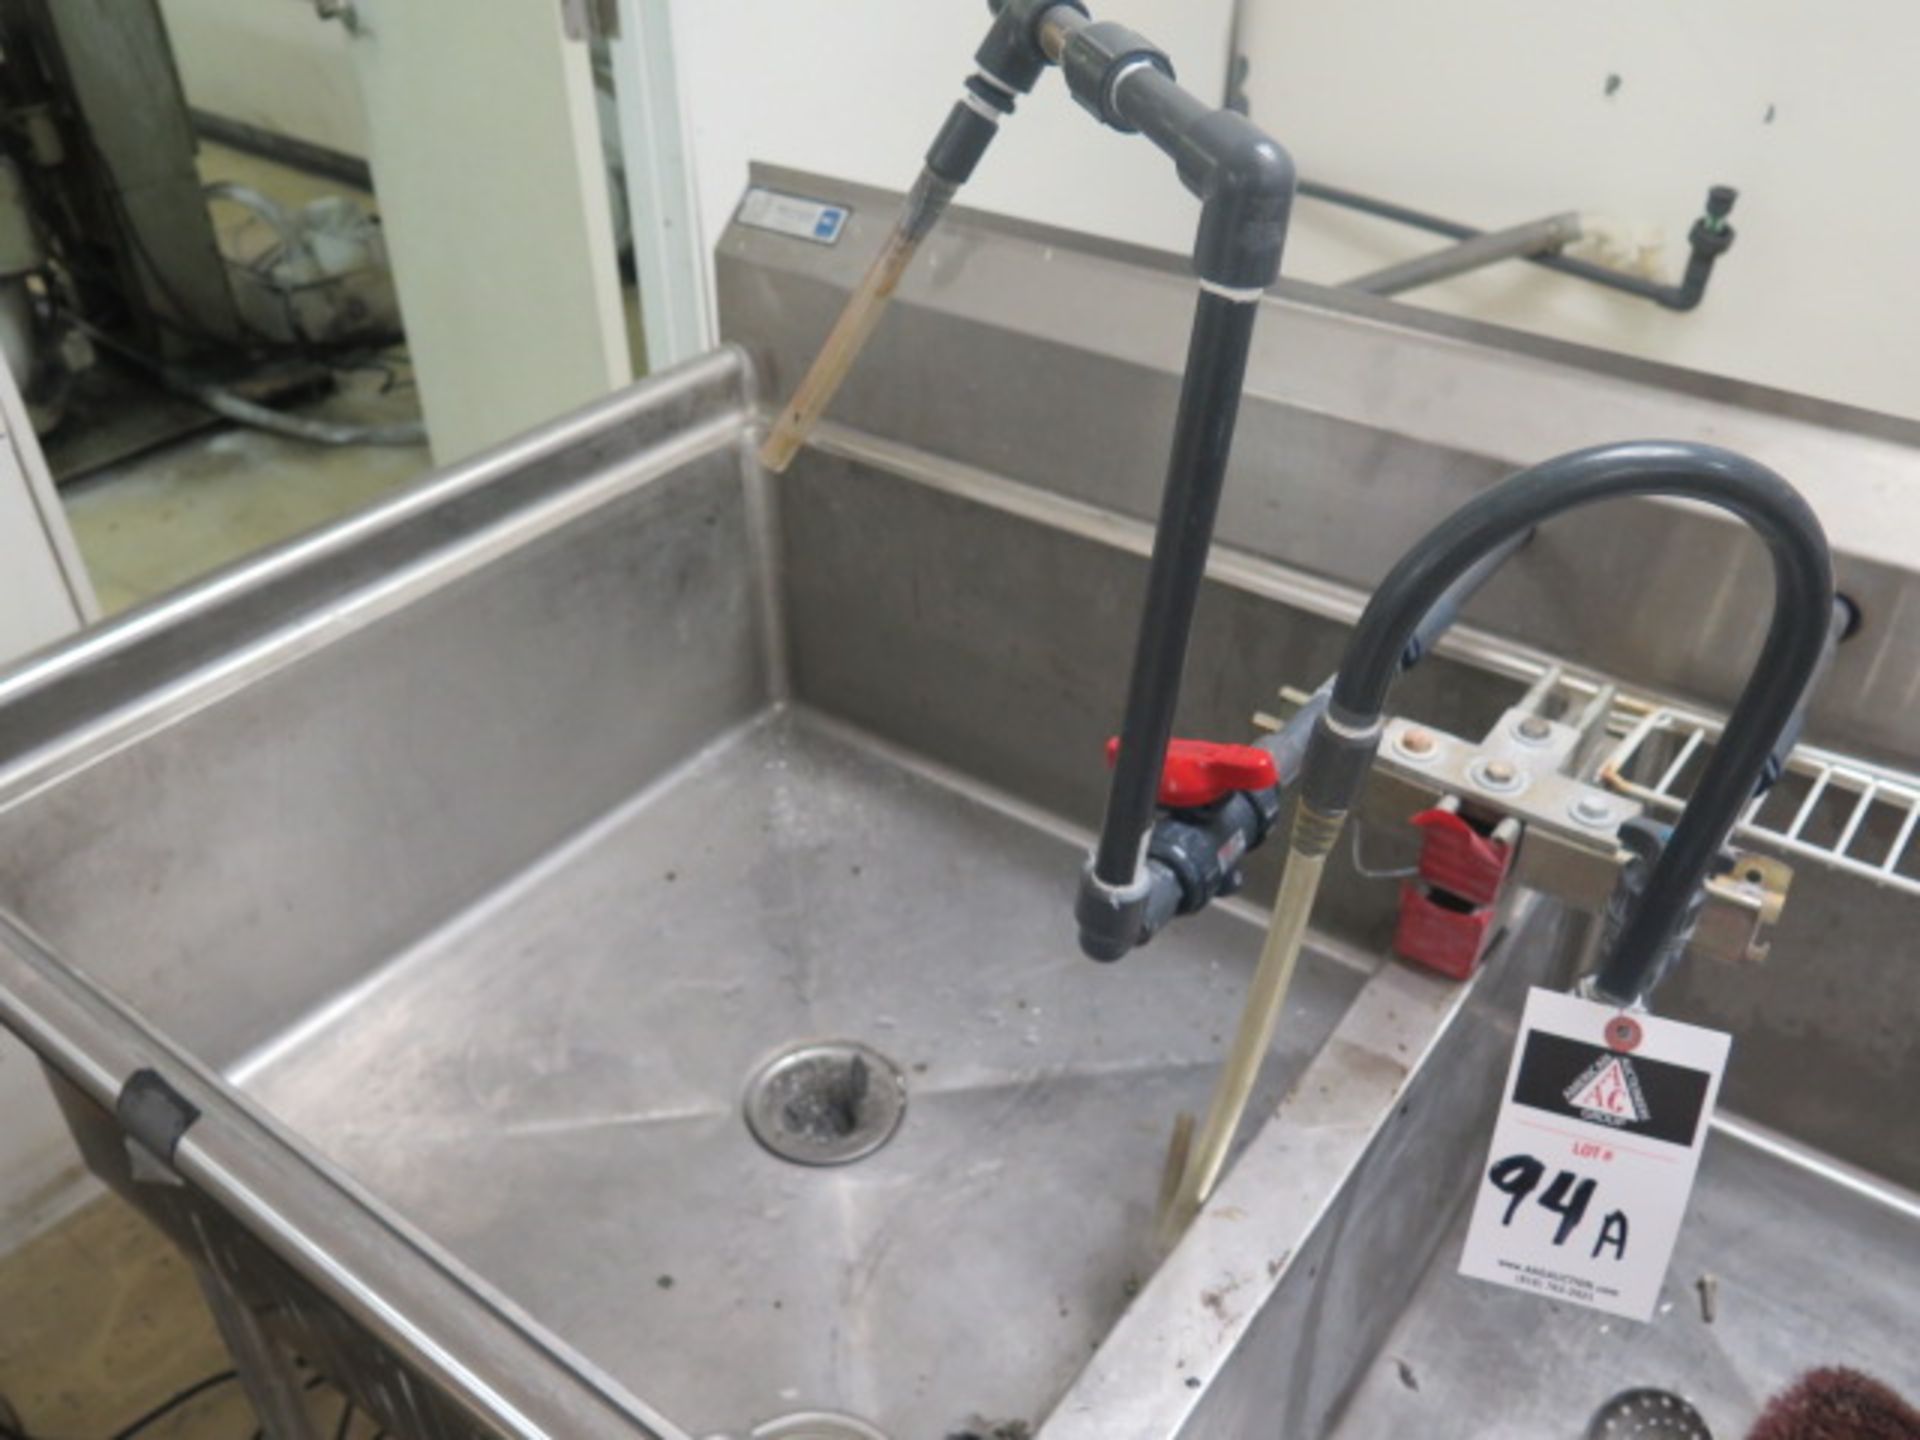 Stainless Steel Sink - Image 2 of 3